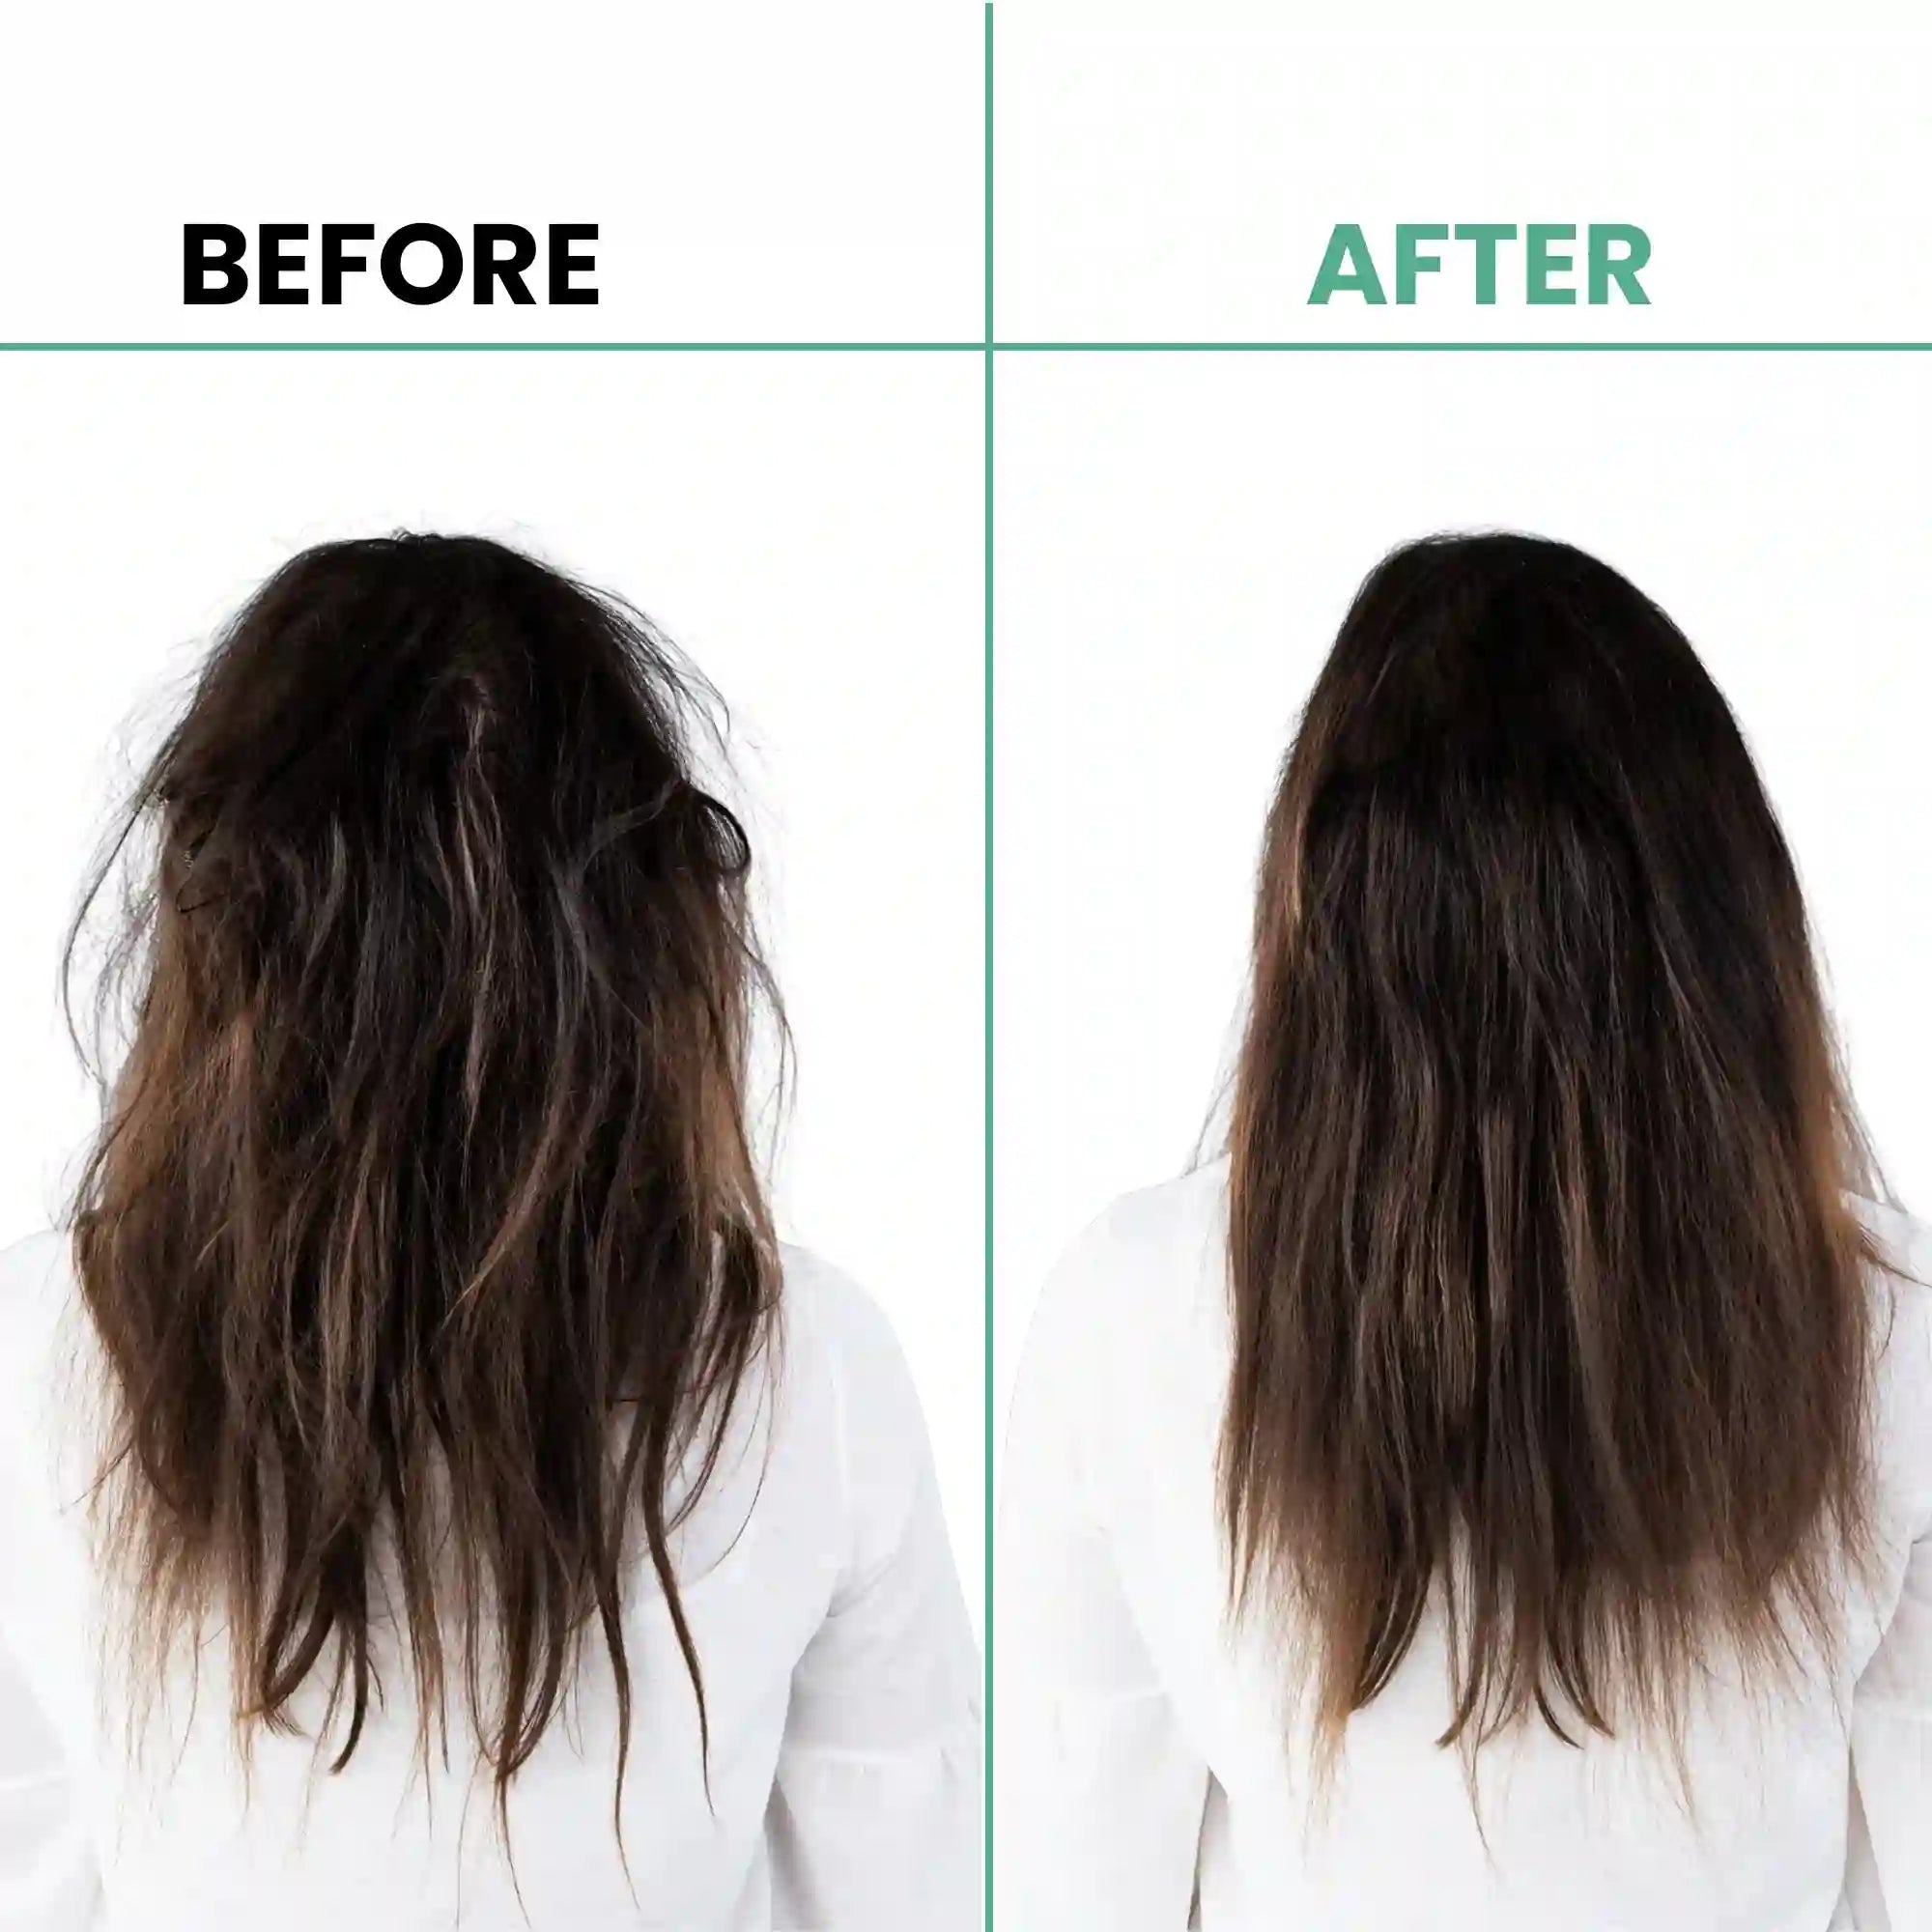 before and after use of ThriveCo hair cream